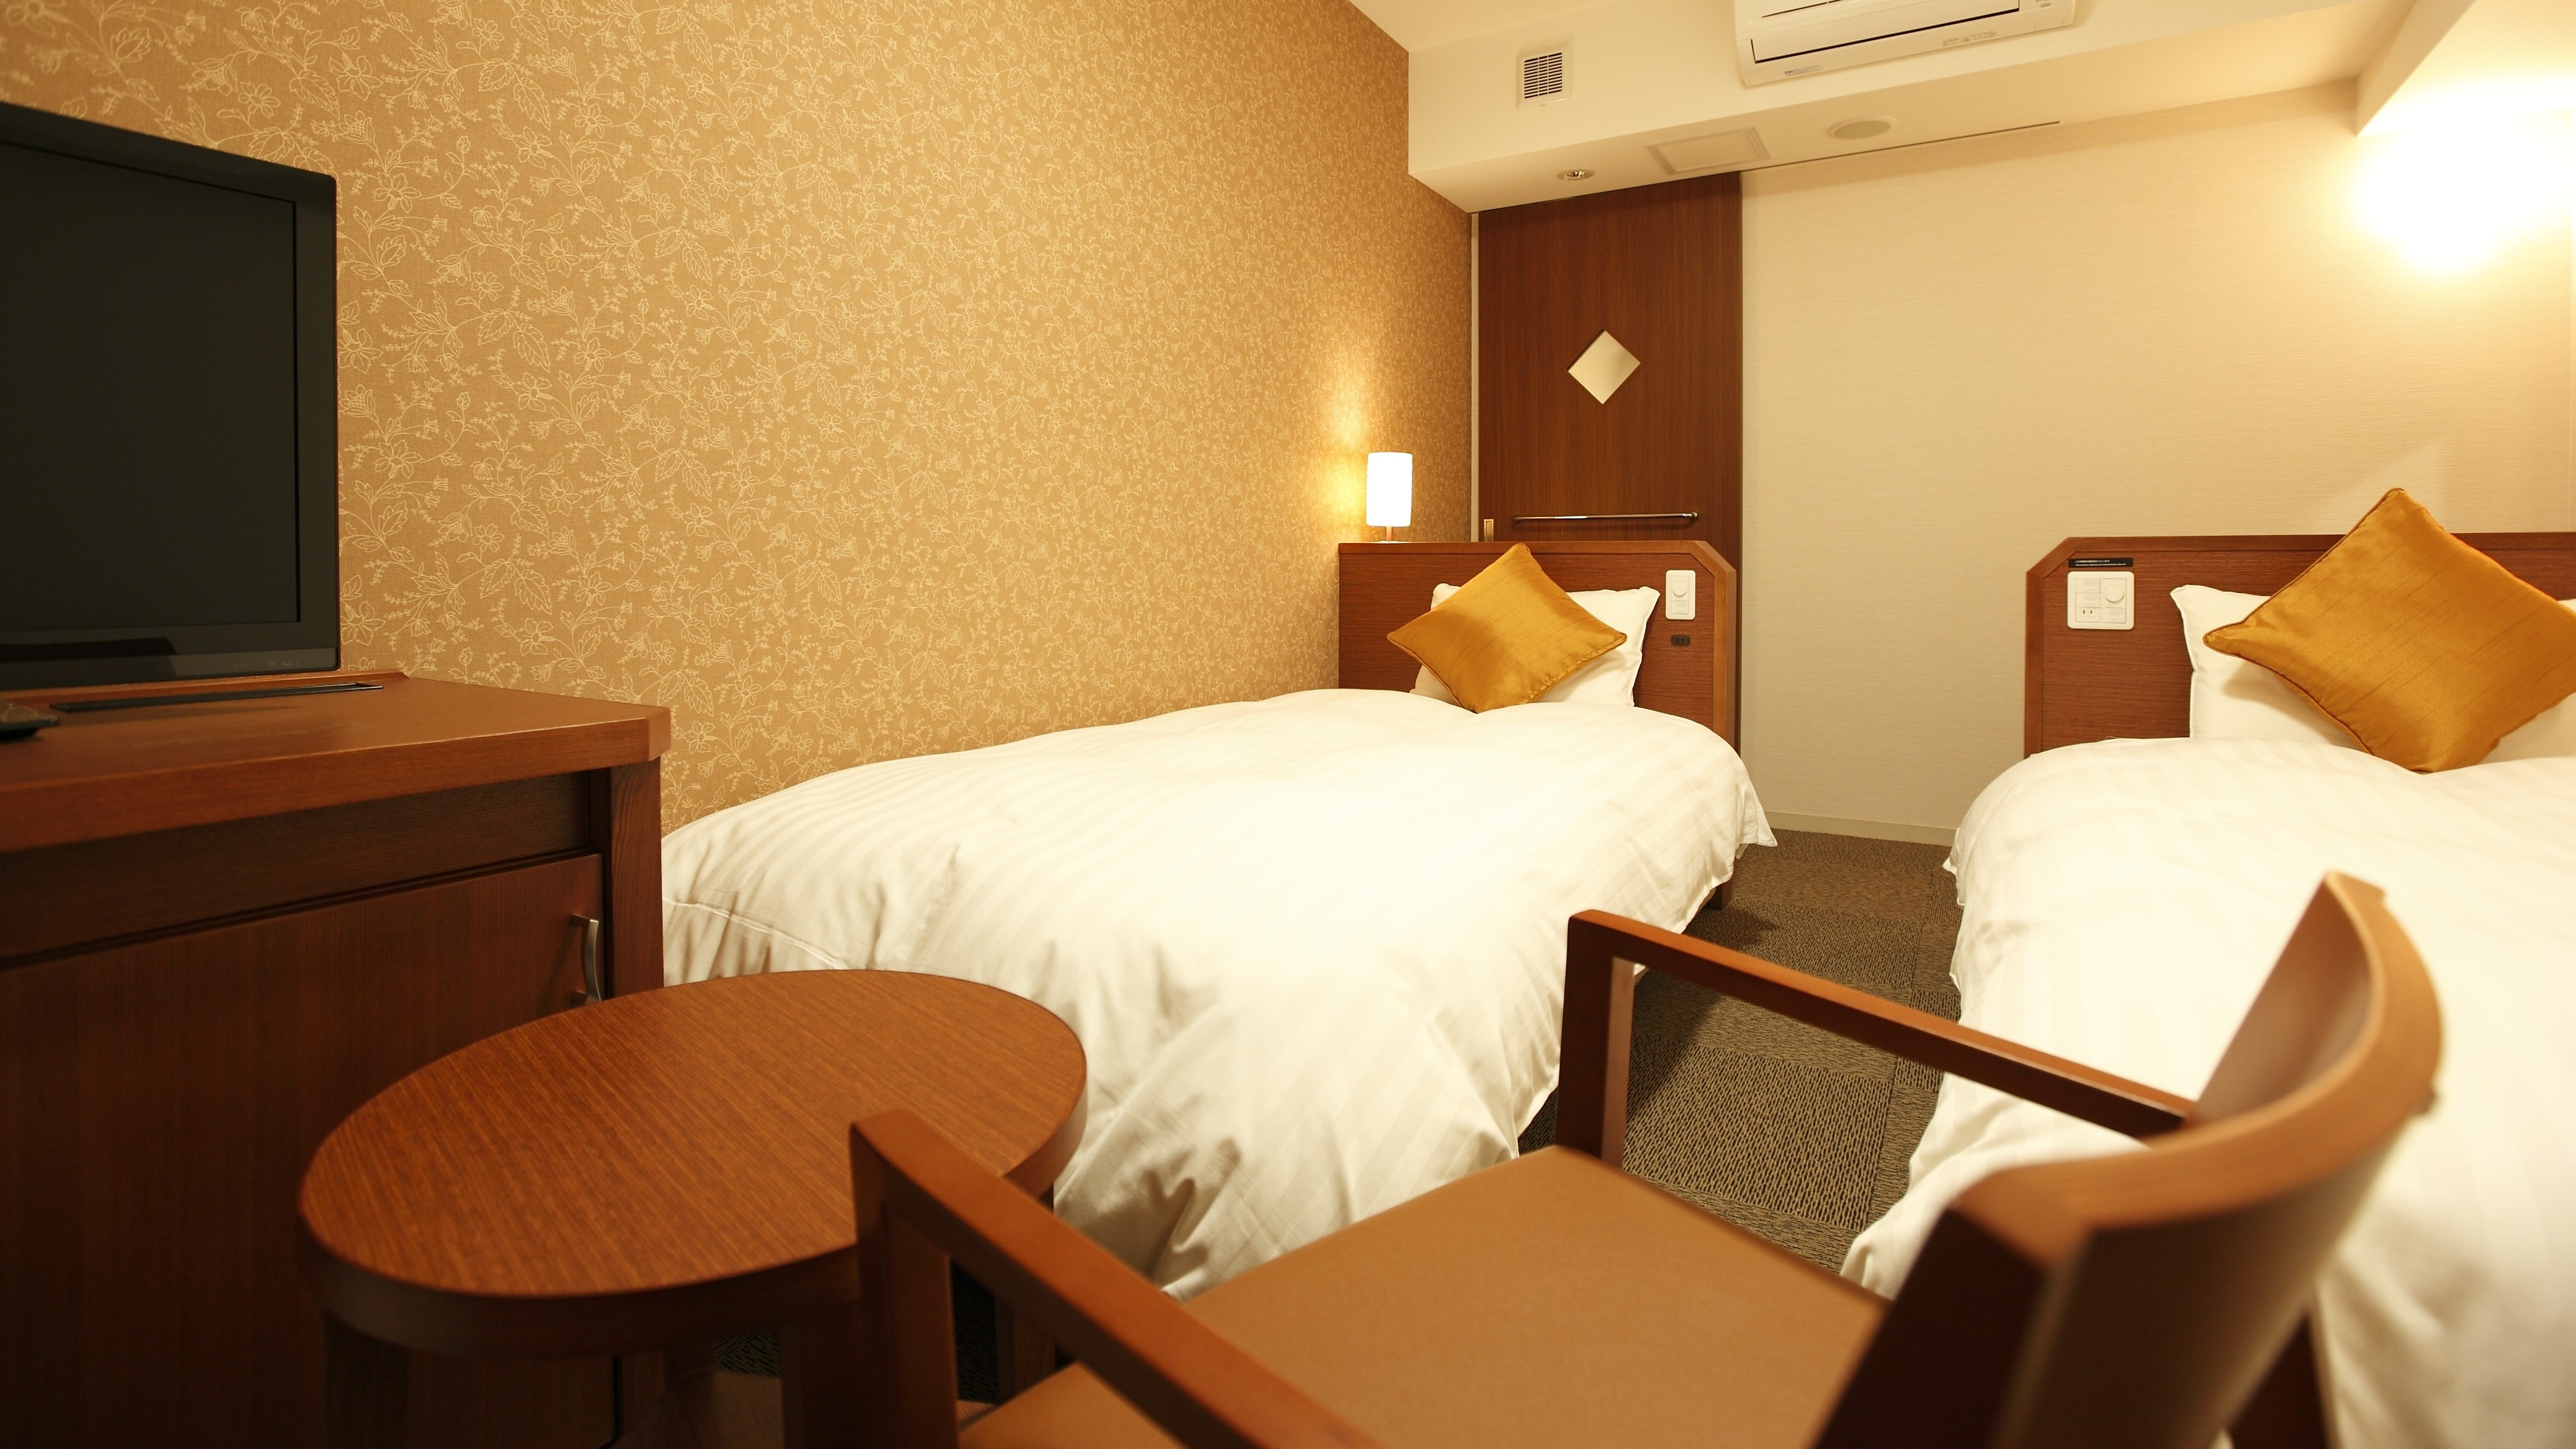 ■Twin room (with shower booth) 20.1 square meters - 20.5 square meters (bed width 110 cm'205 cm'2)